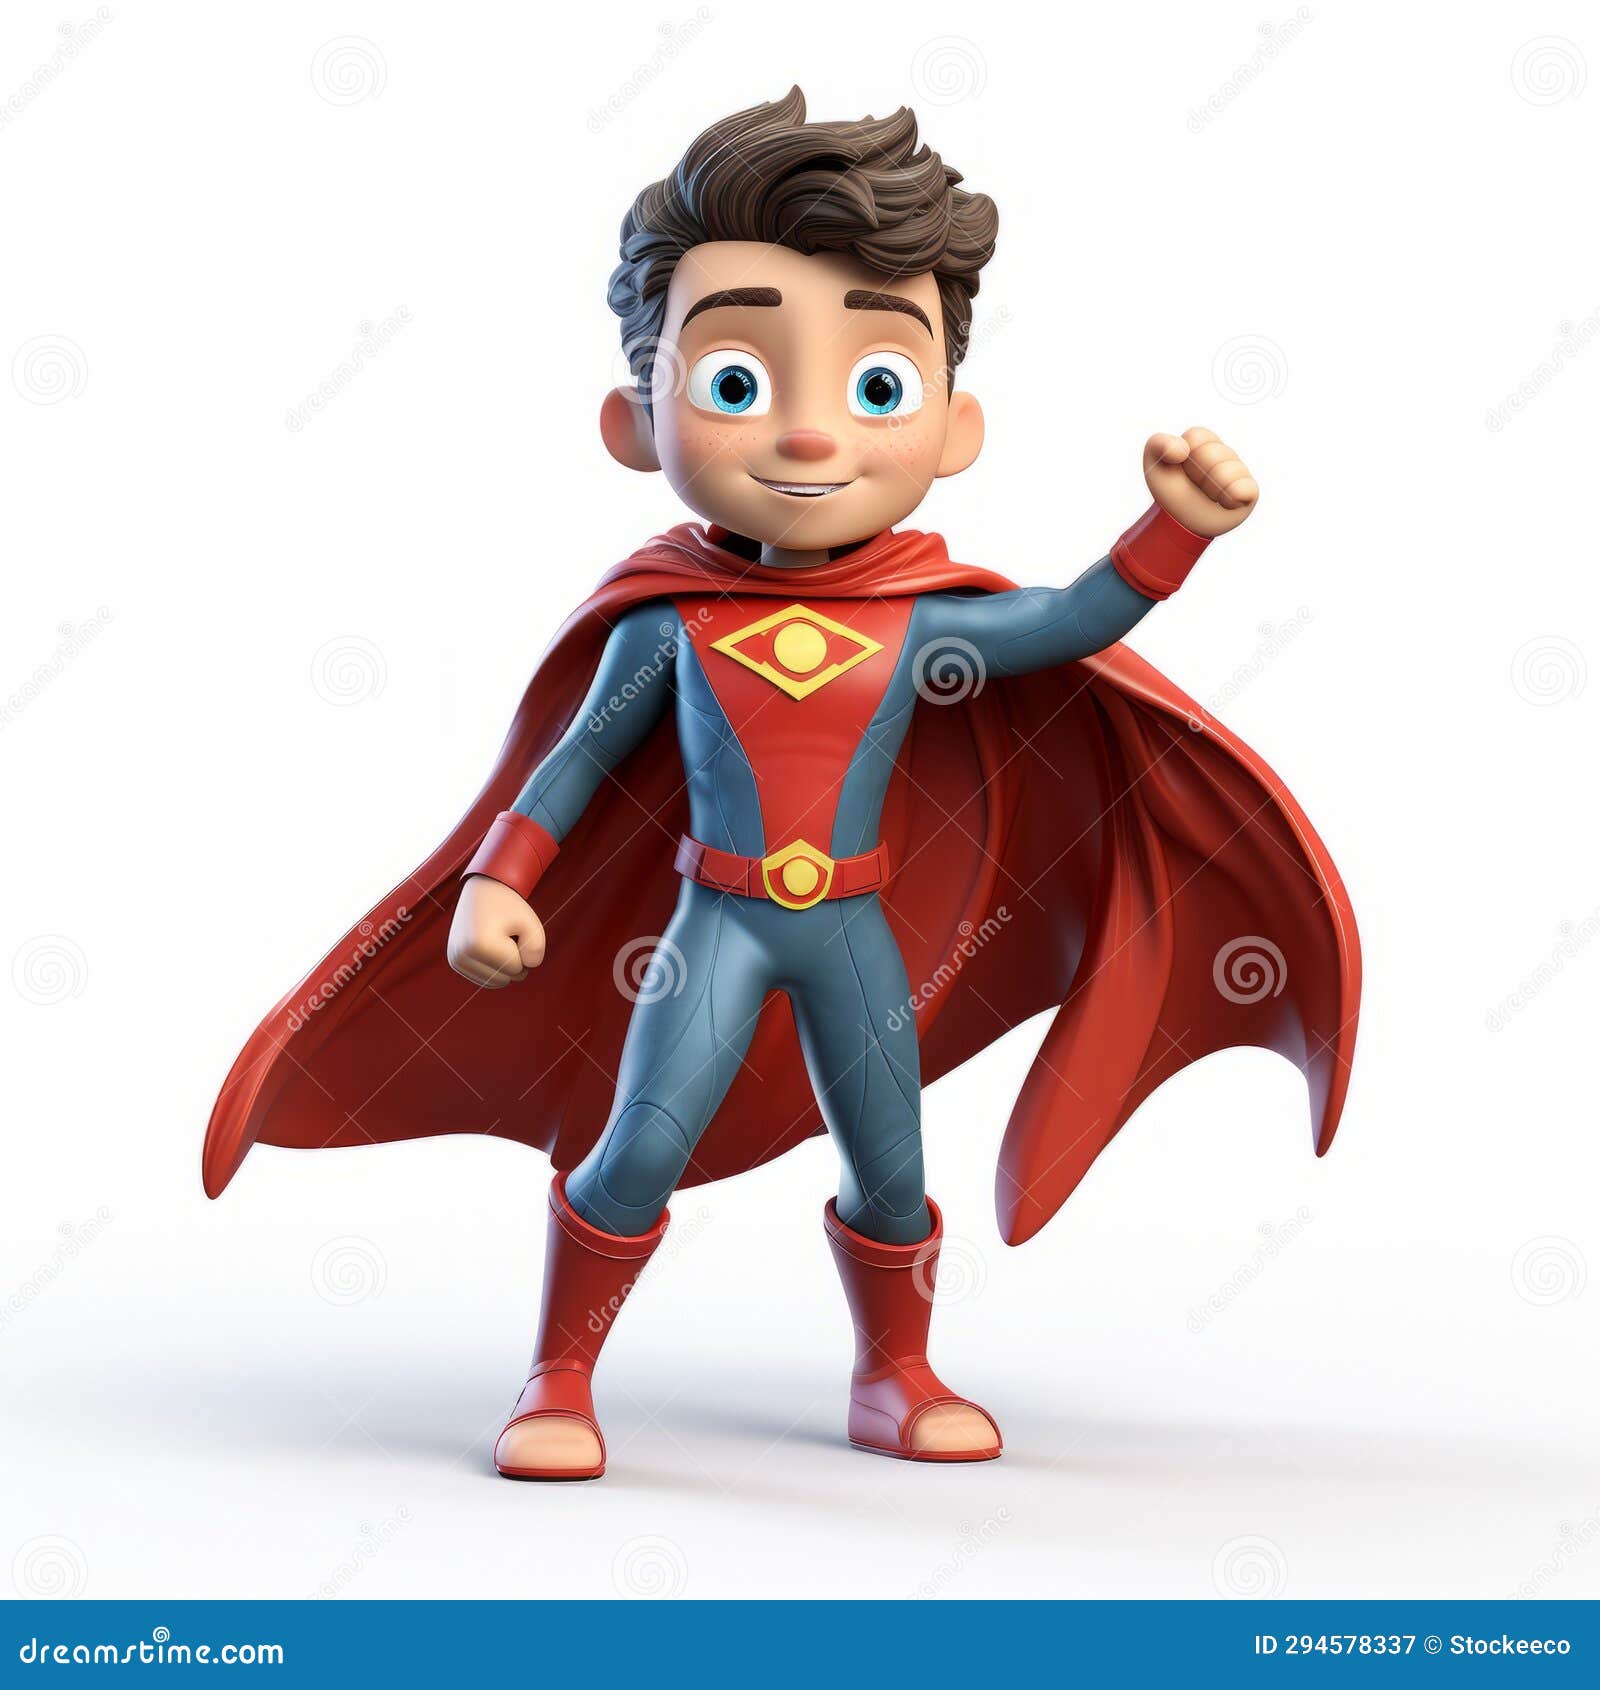 quirky 3d boy superhero in superman outfit clean and charismatic 